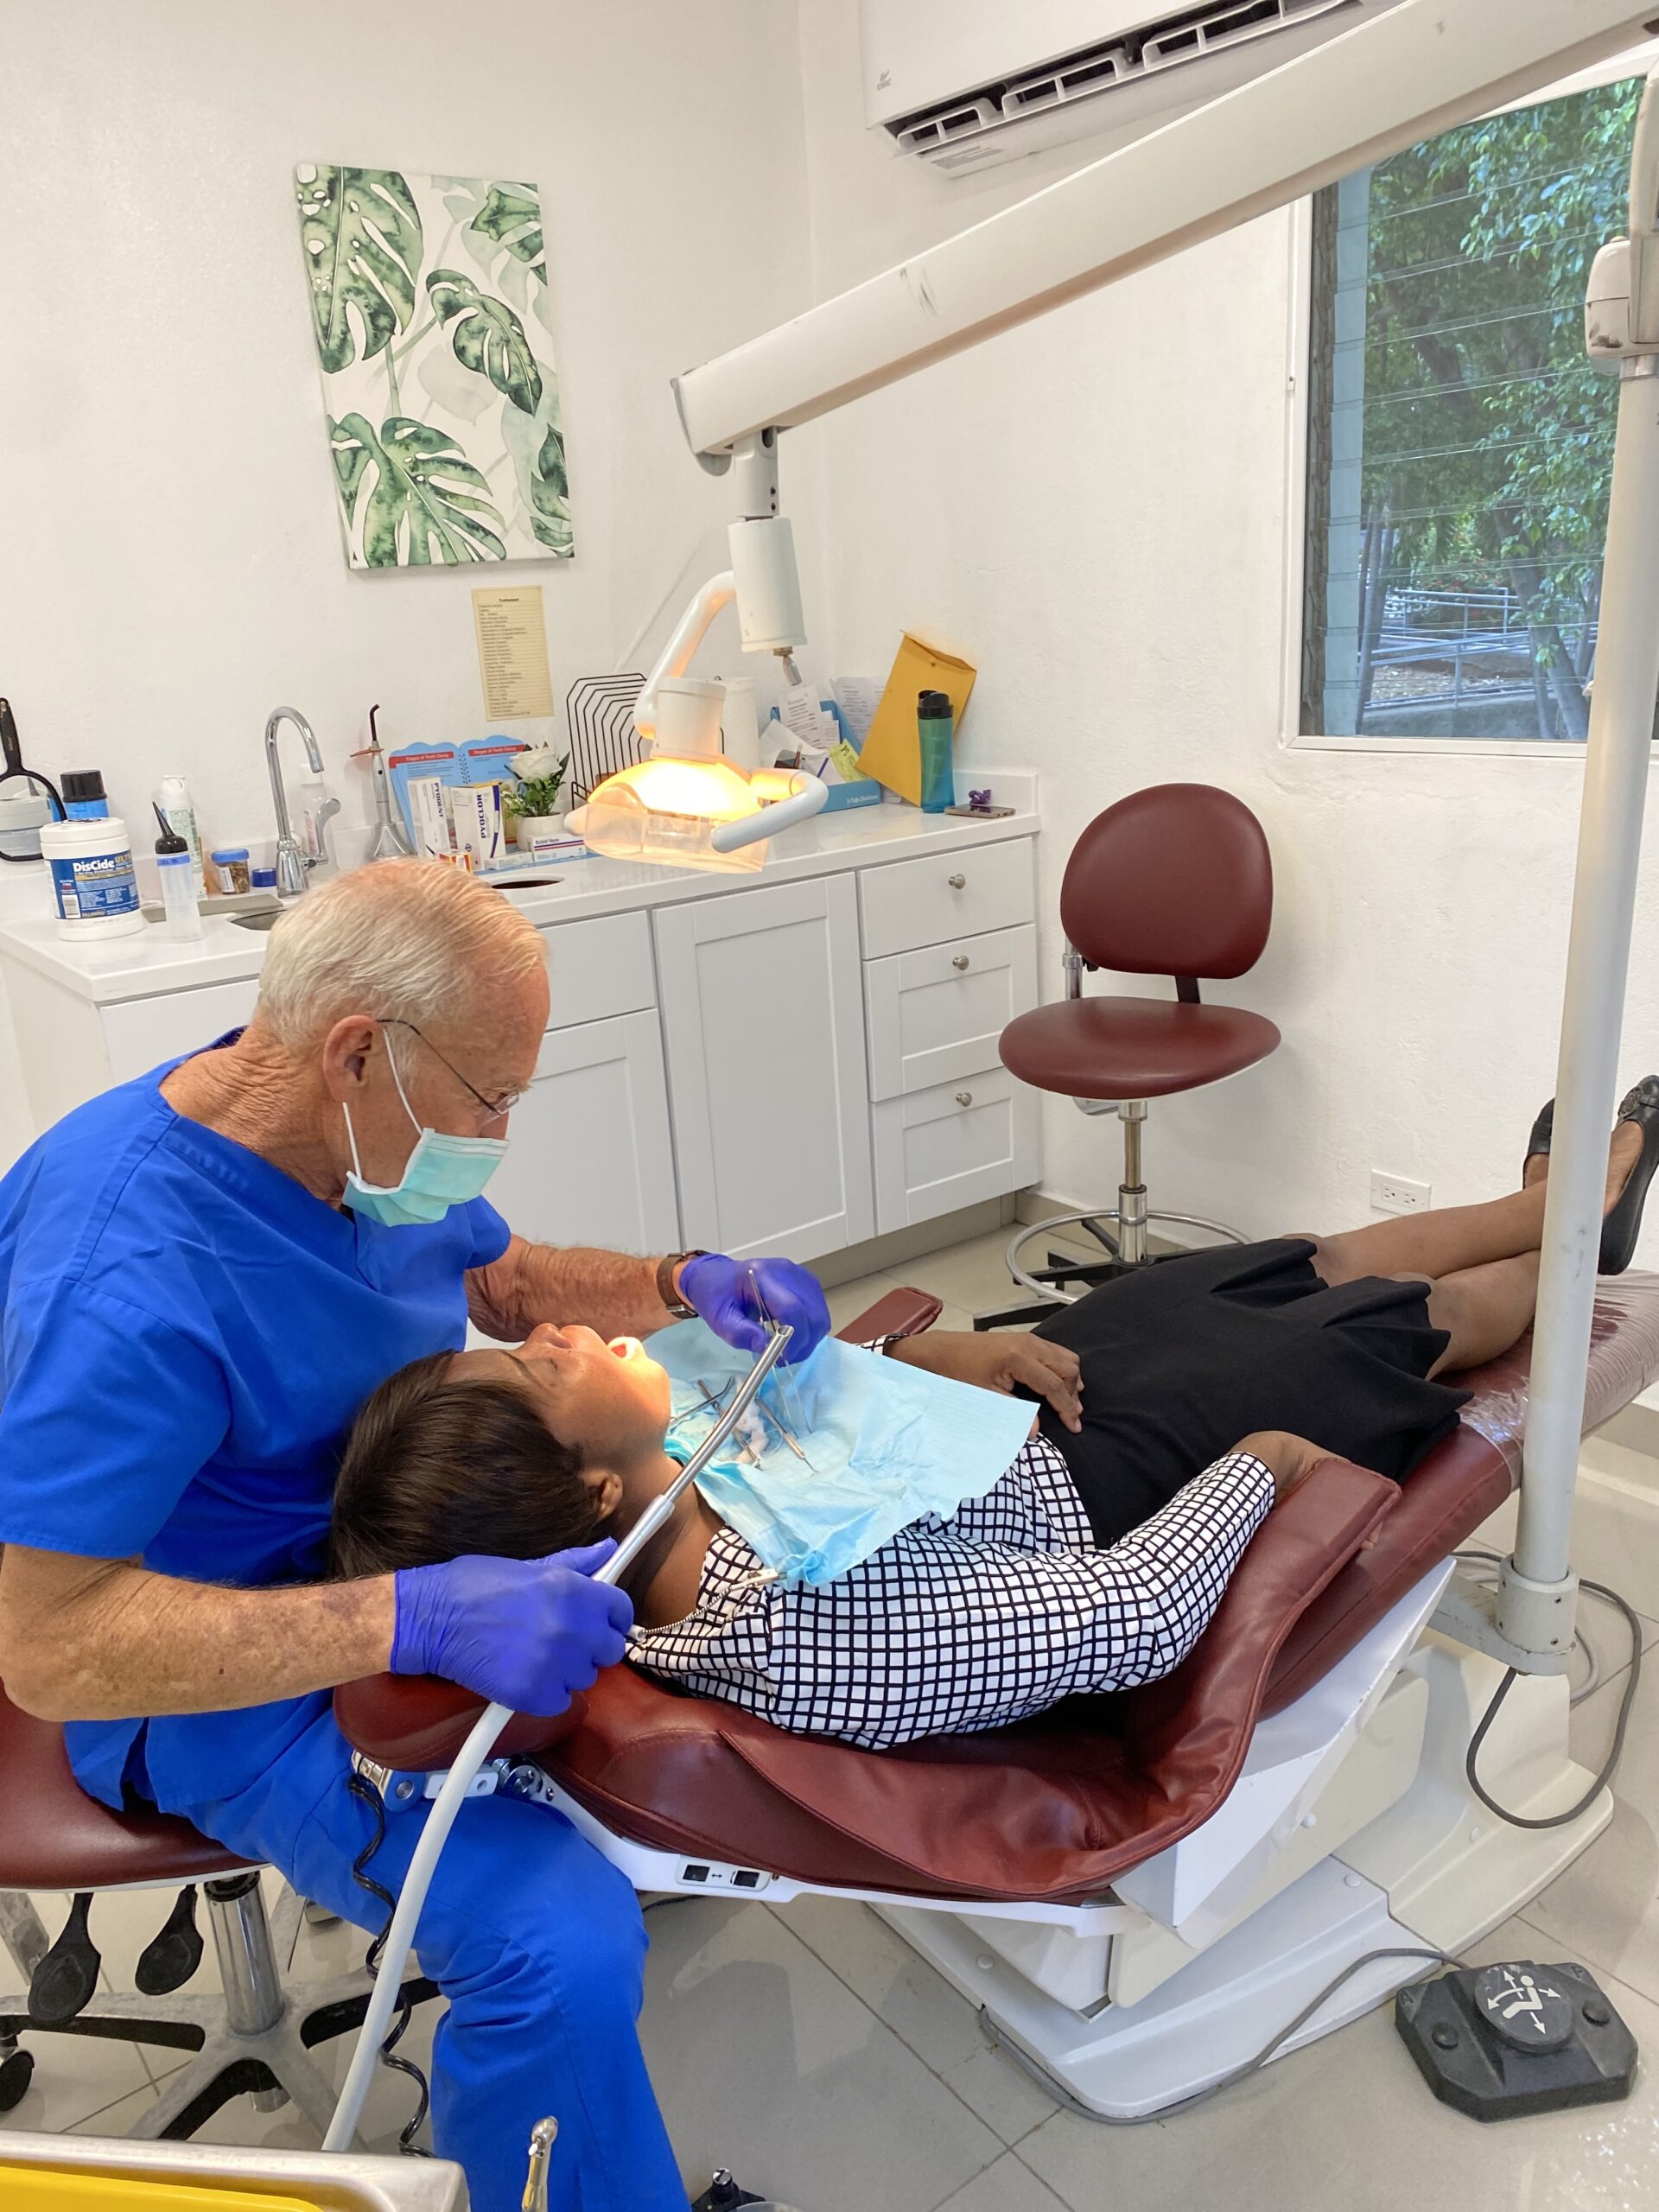 Dentist works inside a patient's mouth with the patient in a dental chair